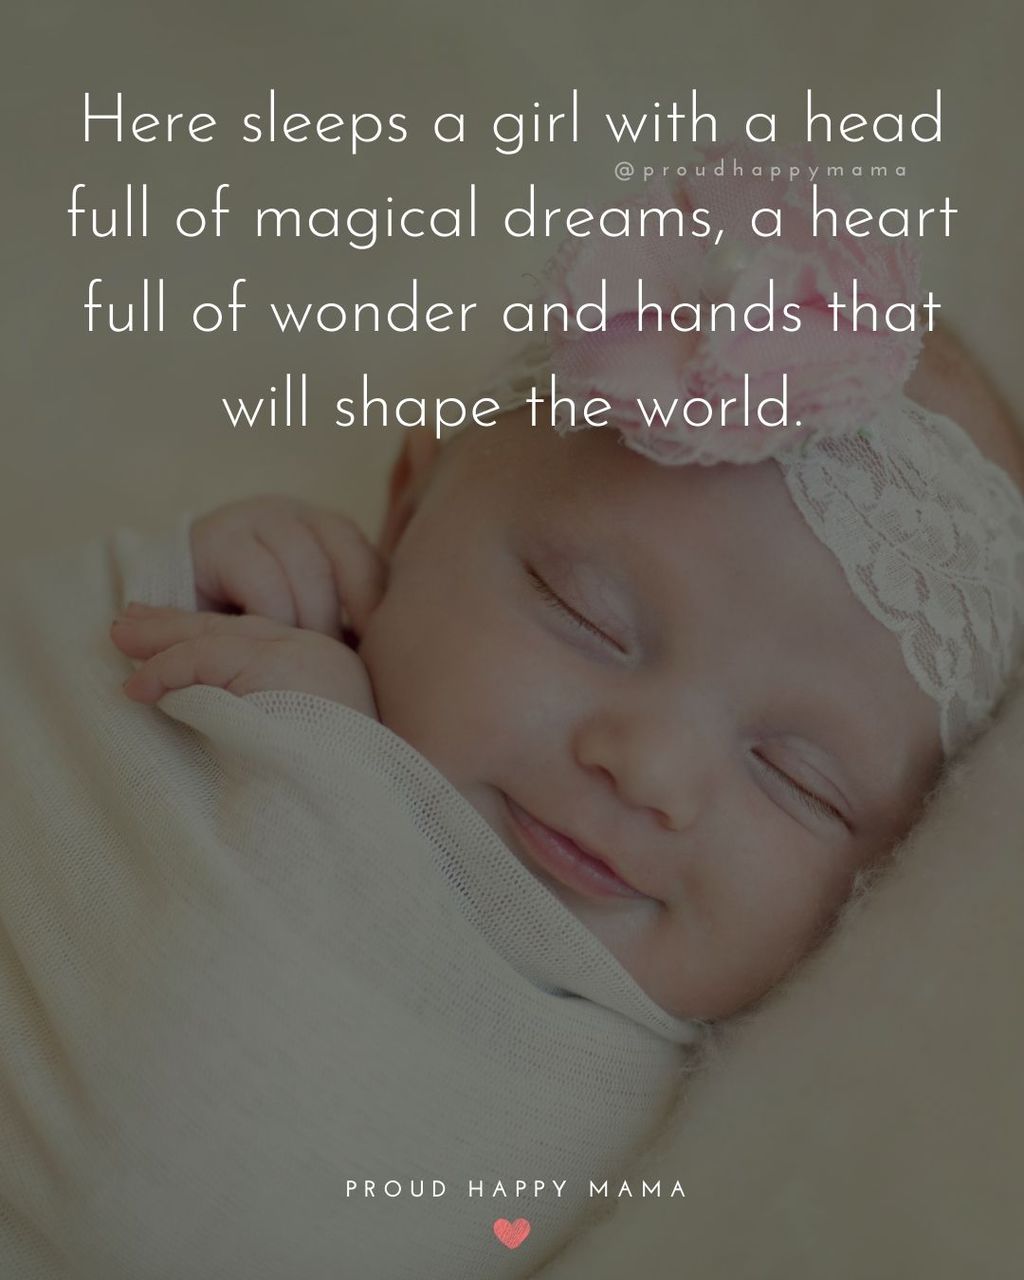 Baby Girl Quotes - Here sleeps a girl with a head full of magical dreams, a heart full of wonder and hands that will shape the world.